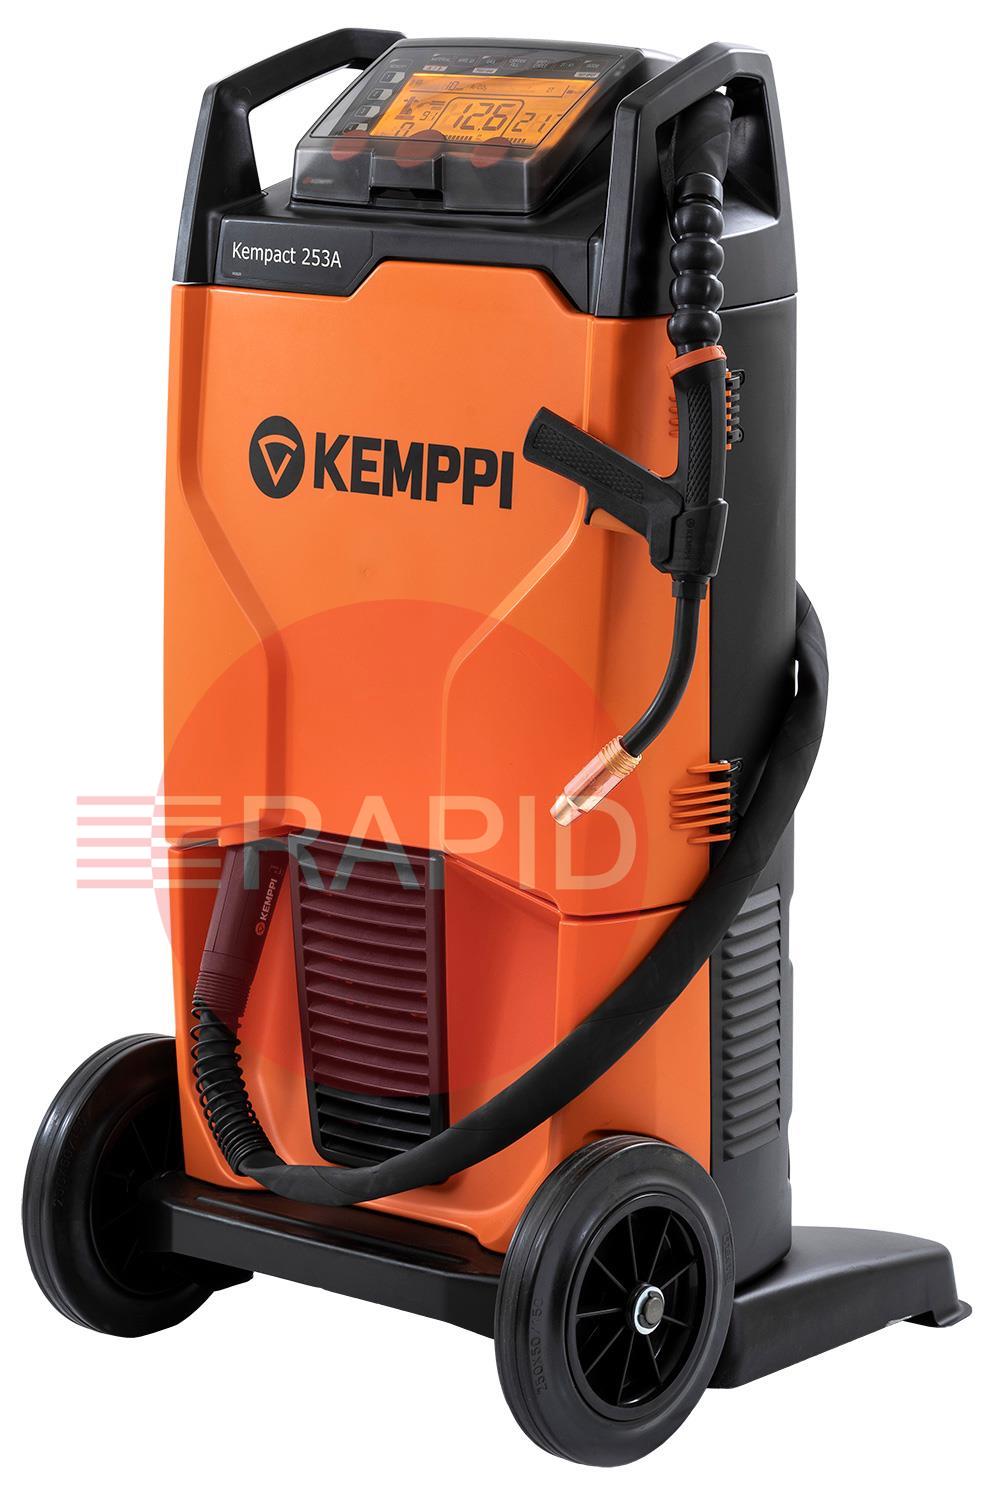 P2271GXE  Kemppi Kempact RA 253A, 250A 3 Phase 400v Mig Welder, with Flexlite GXe 205G 3.5m Torch